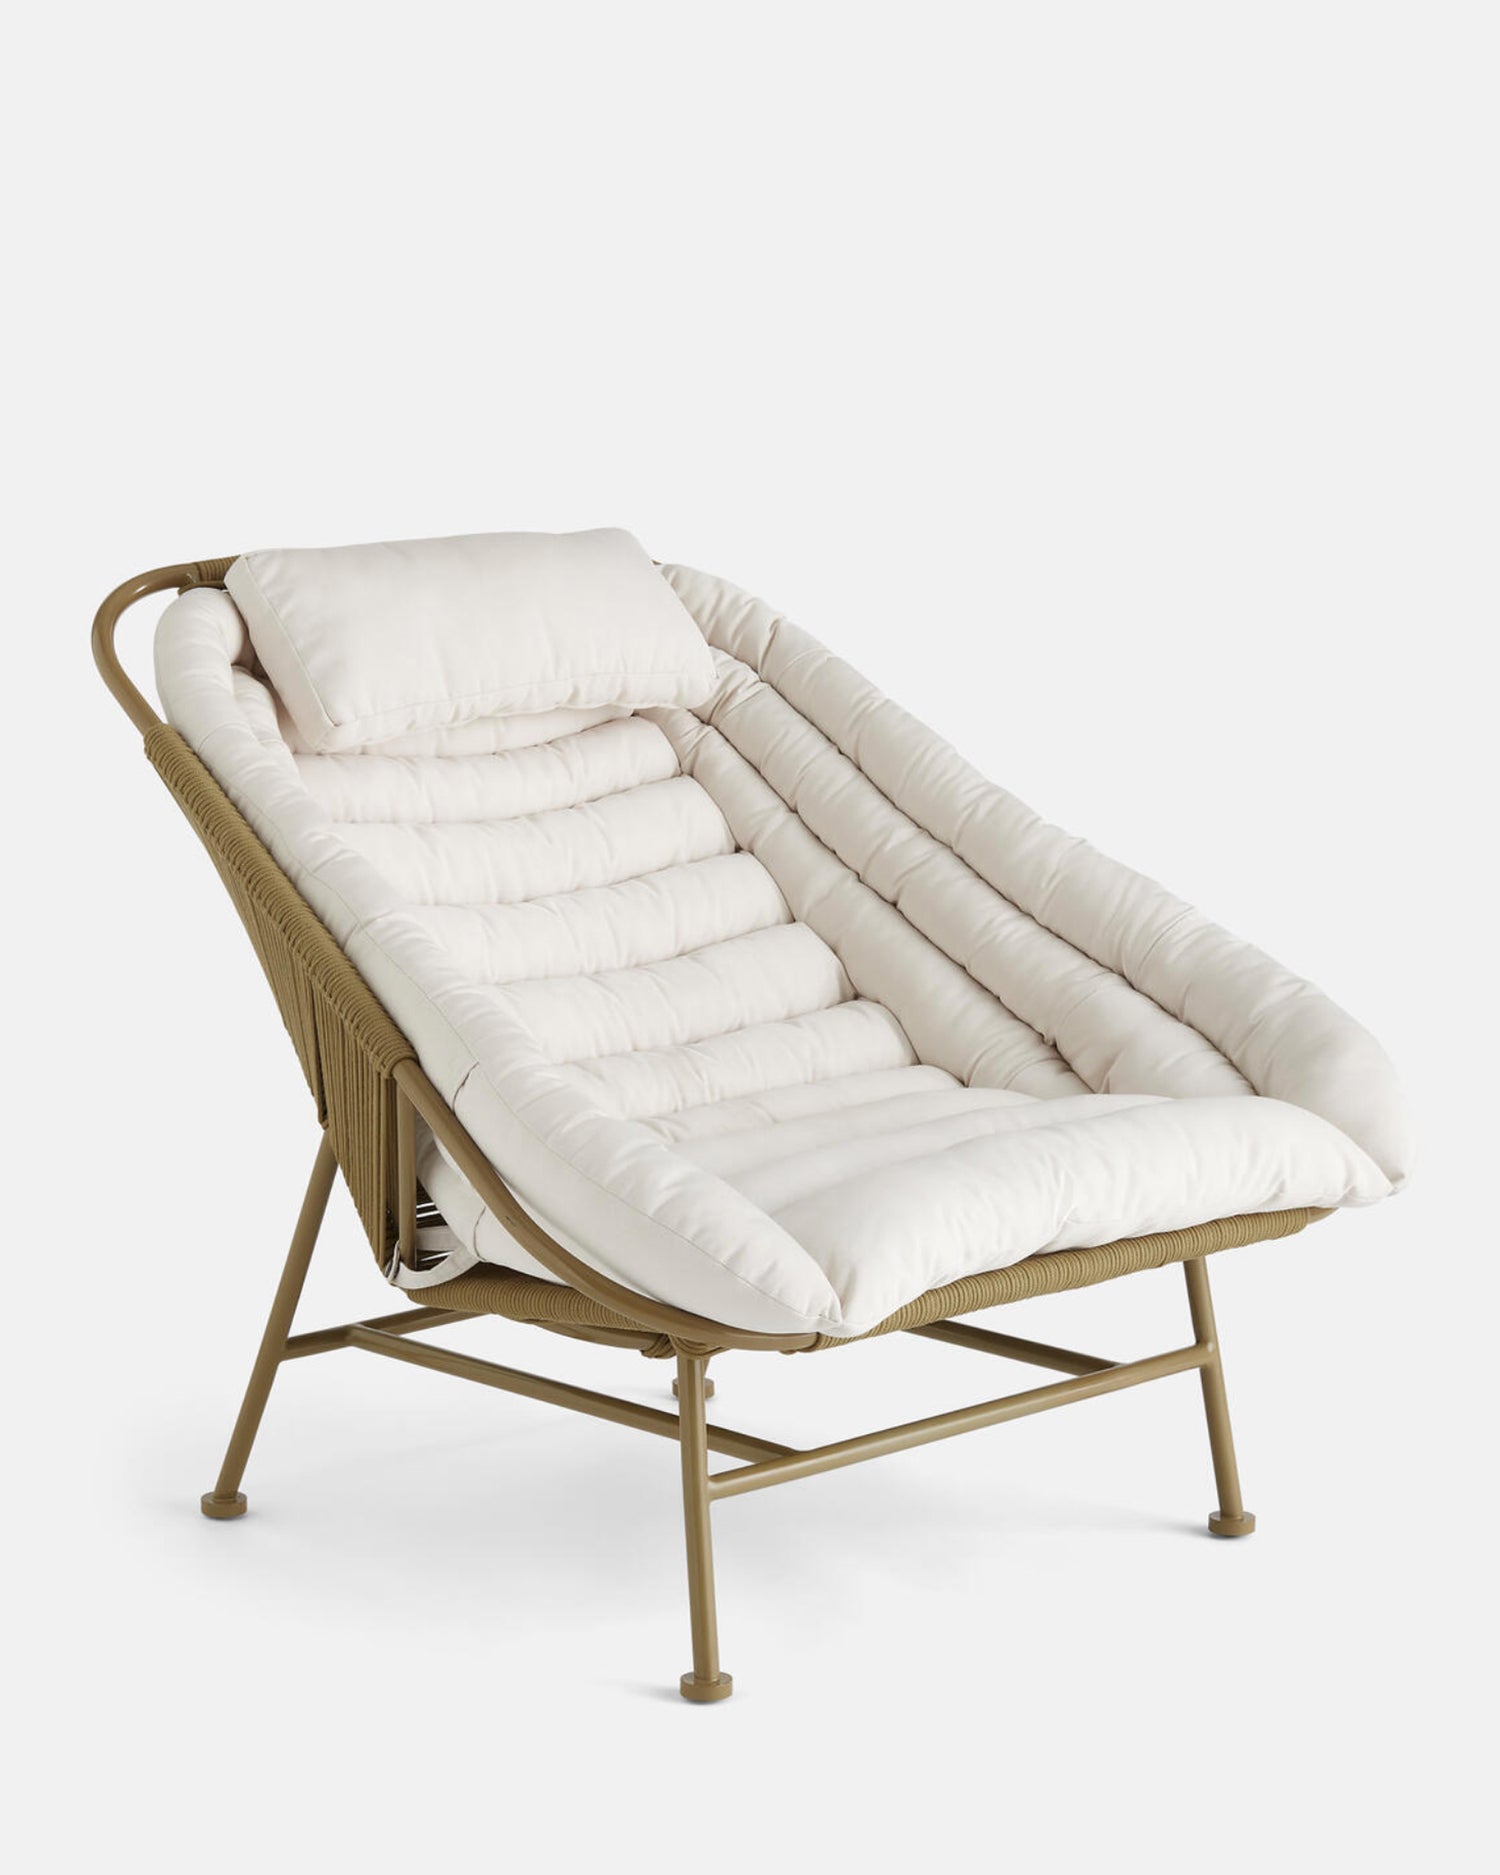 Elodie Outdoor Chair